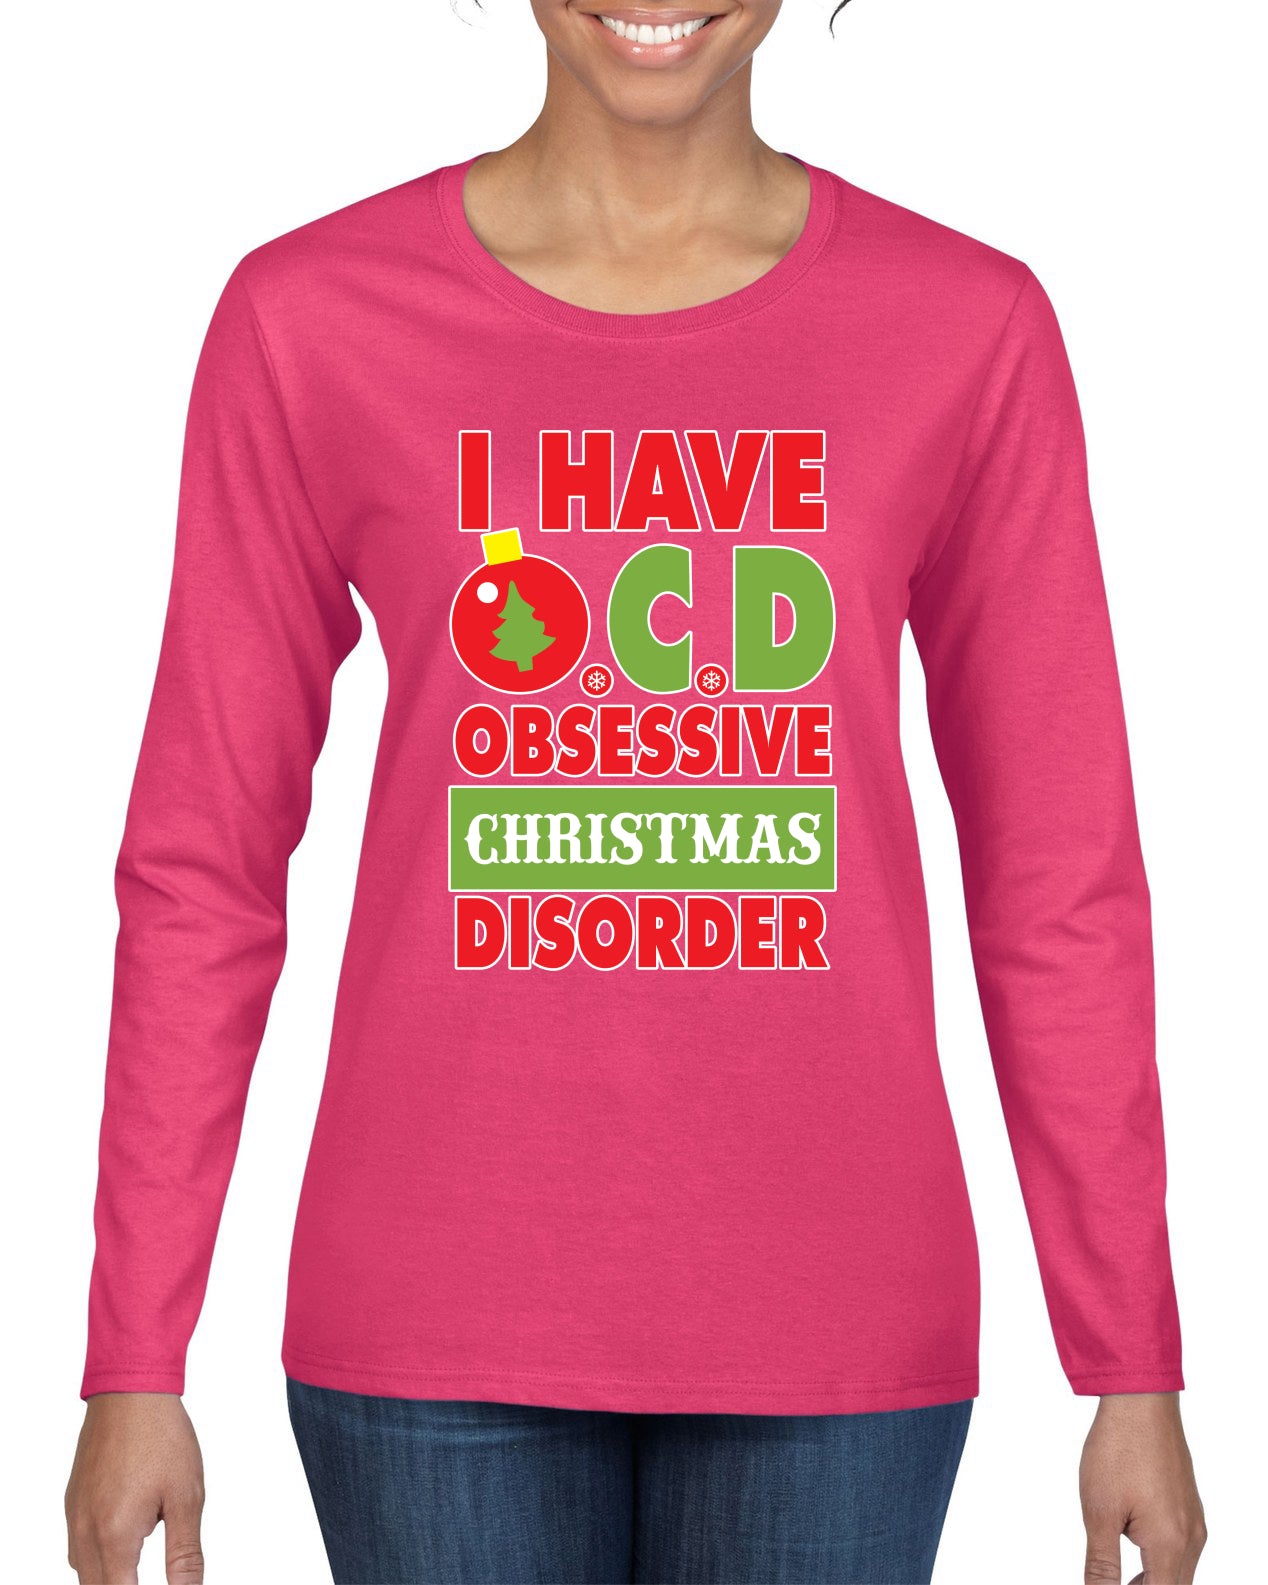 I Have O.C.D Obsessive Christmas Disorder Womens Graphic Long Sleeve T-Shirt